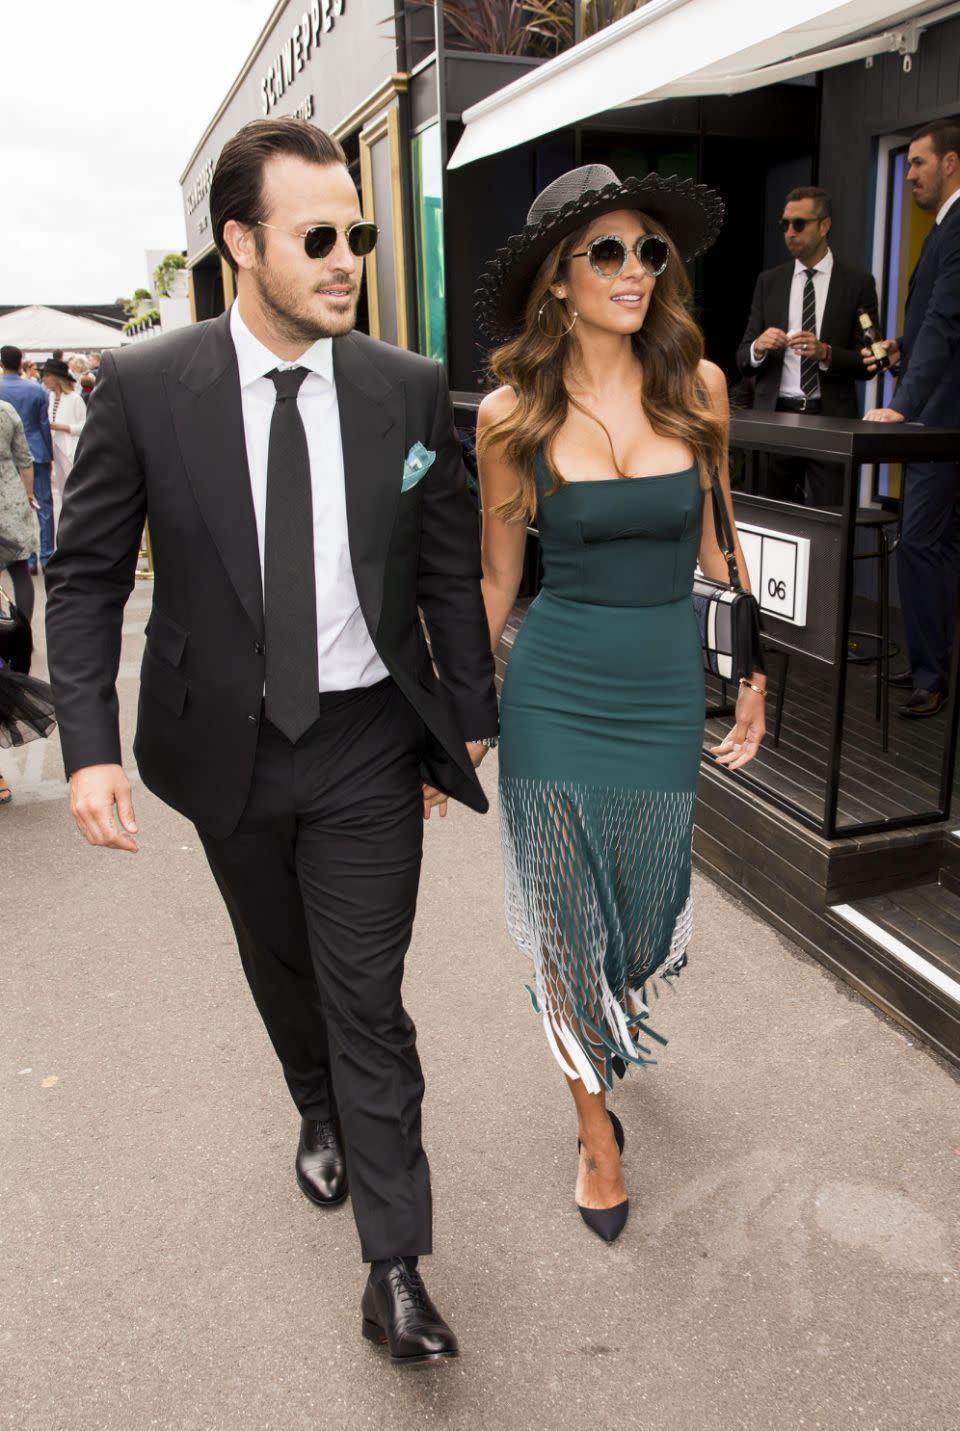 The stunner walked hand-in-hand with her fiance, Tyson Mullane. Photo: Media Mode